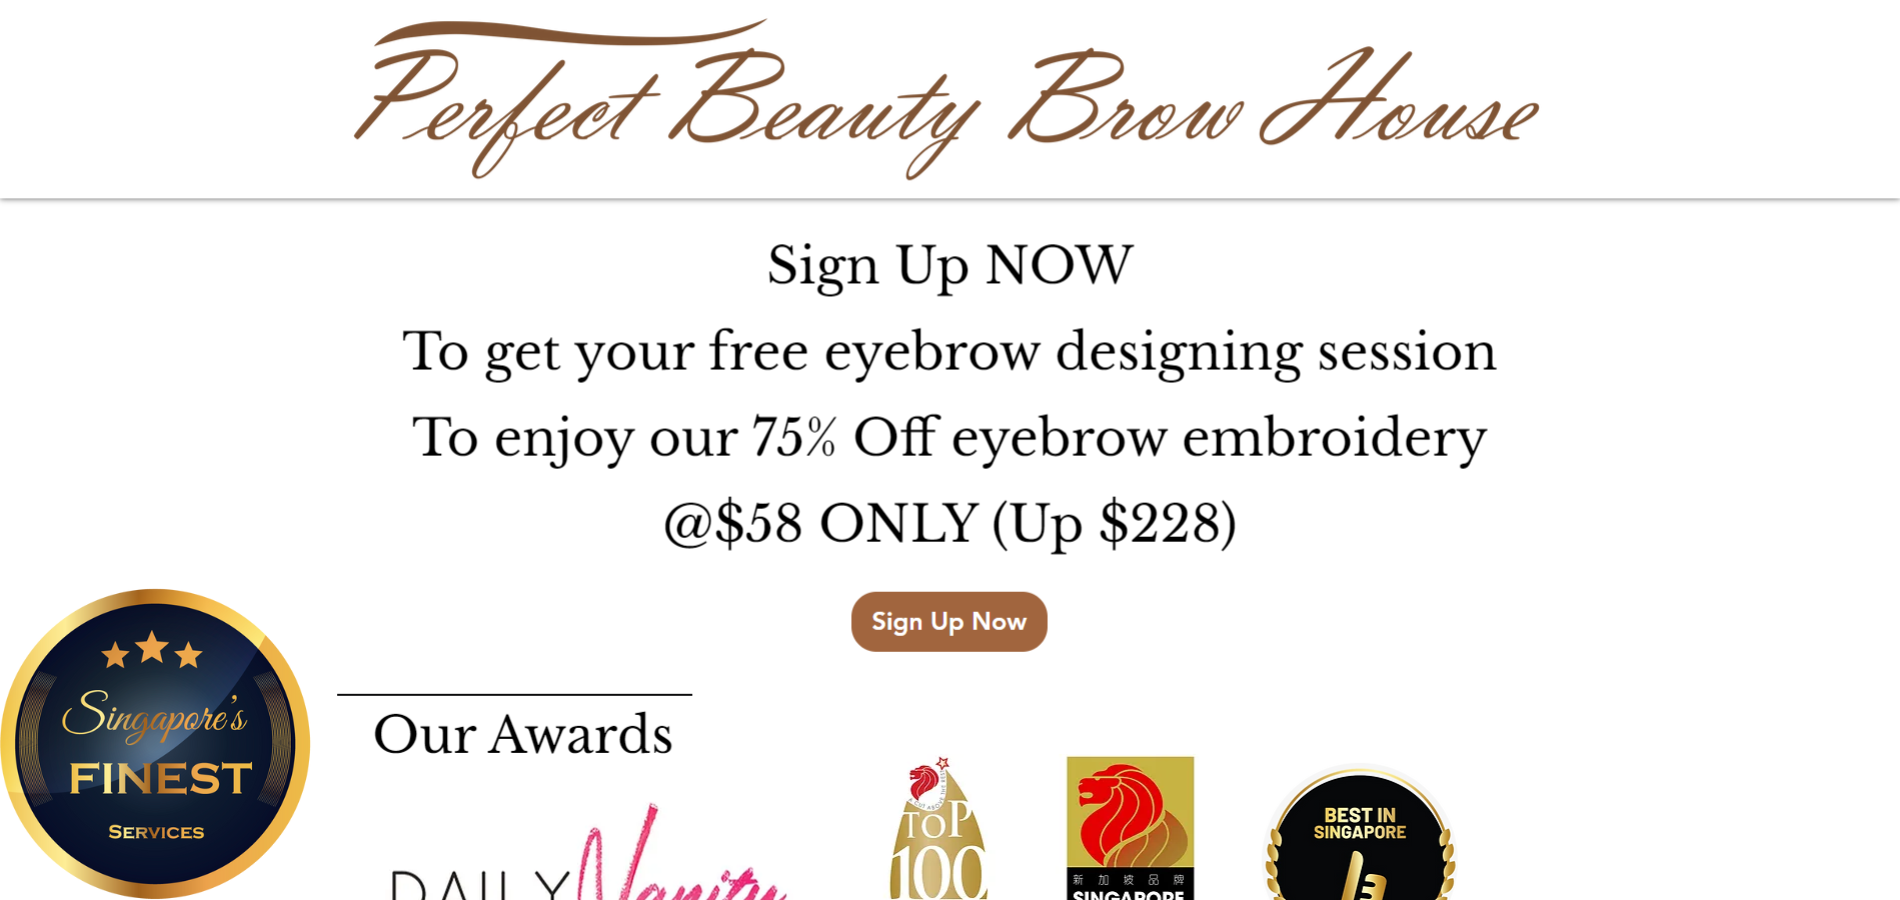 The Finest Eyebrow Embroidery Services in Singapore